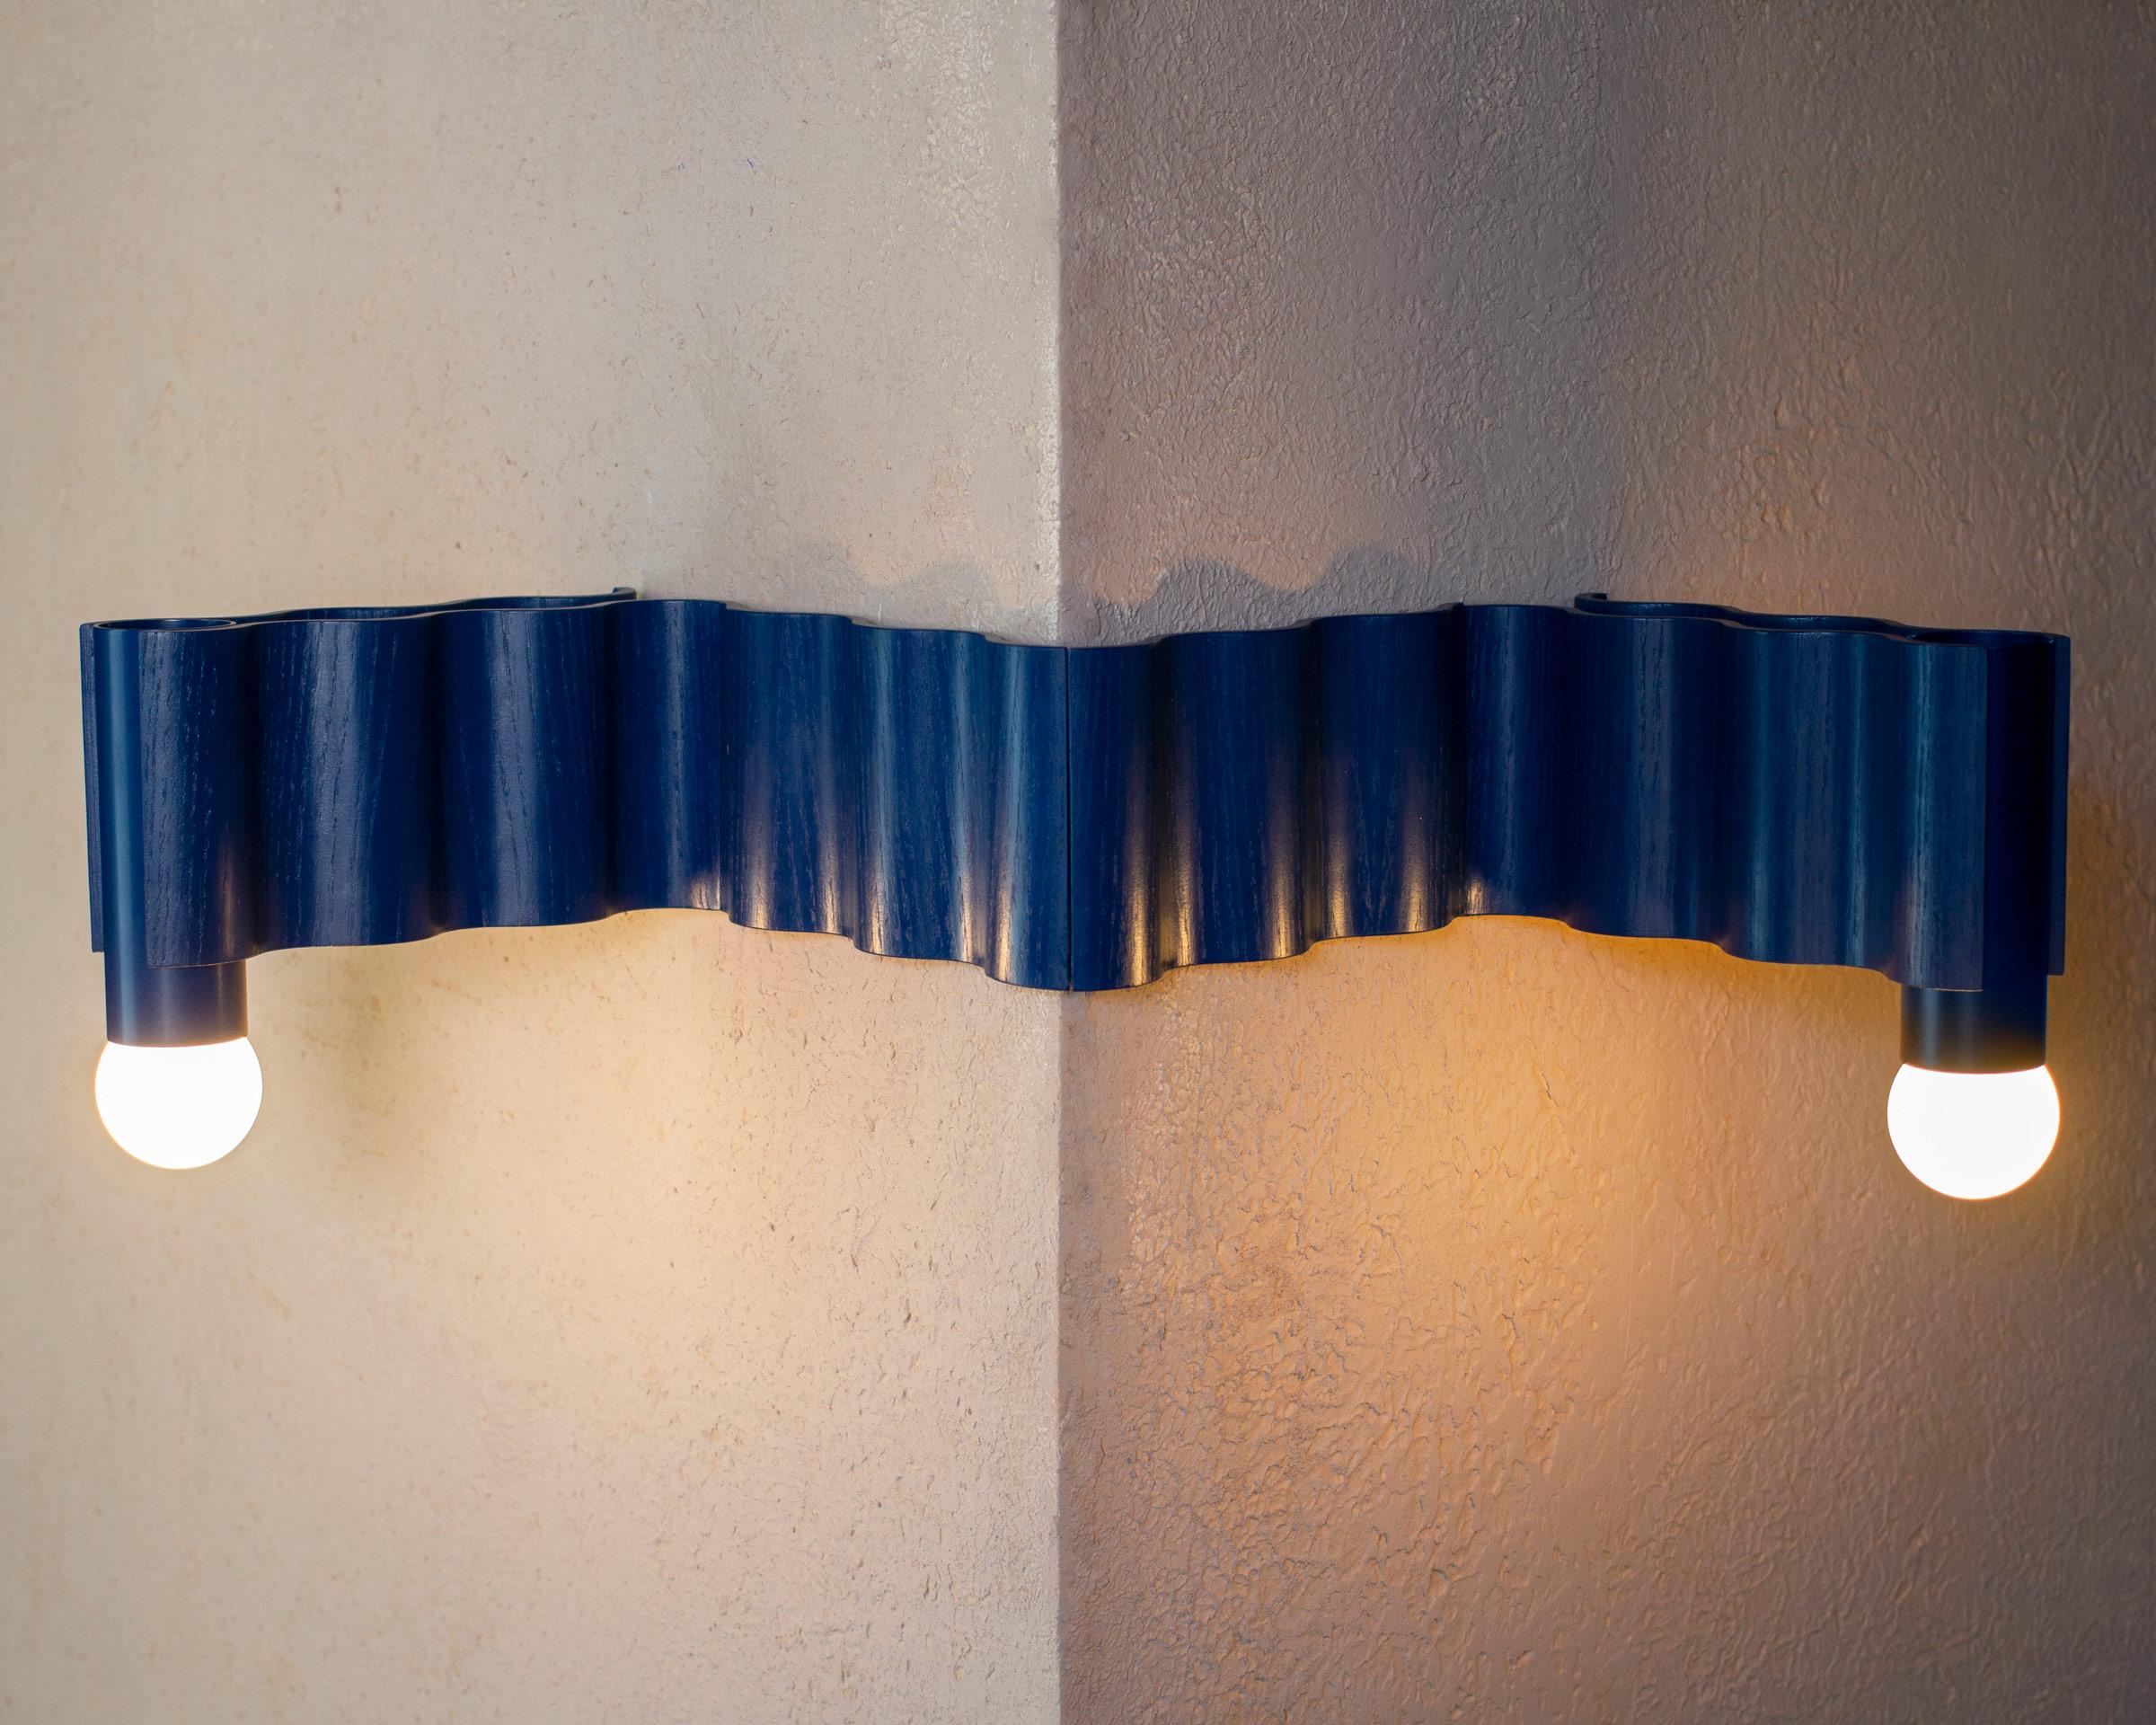 Single Corrugation Sconce / Wall Light in Natural Ash Veneer and Sapphire Blue For Sale 8